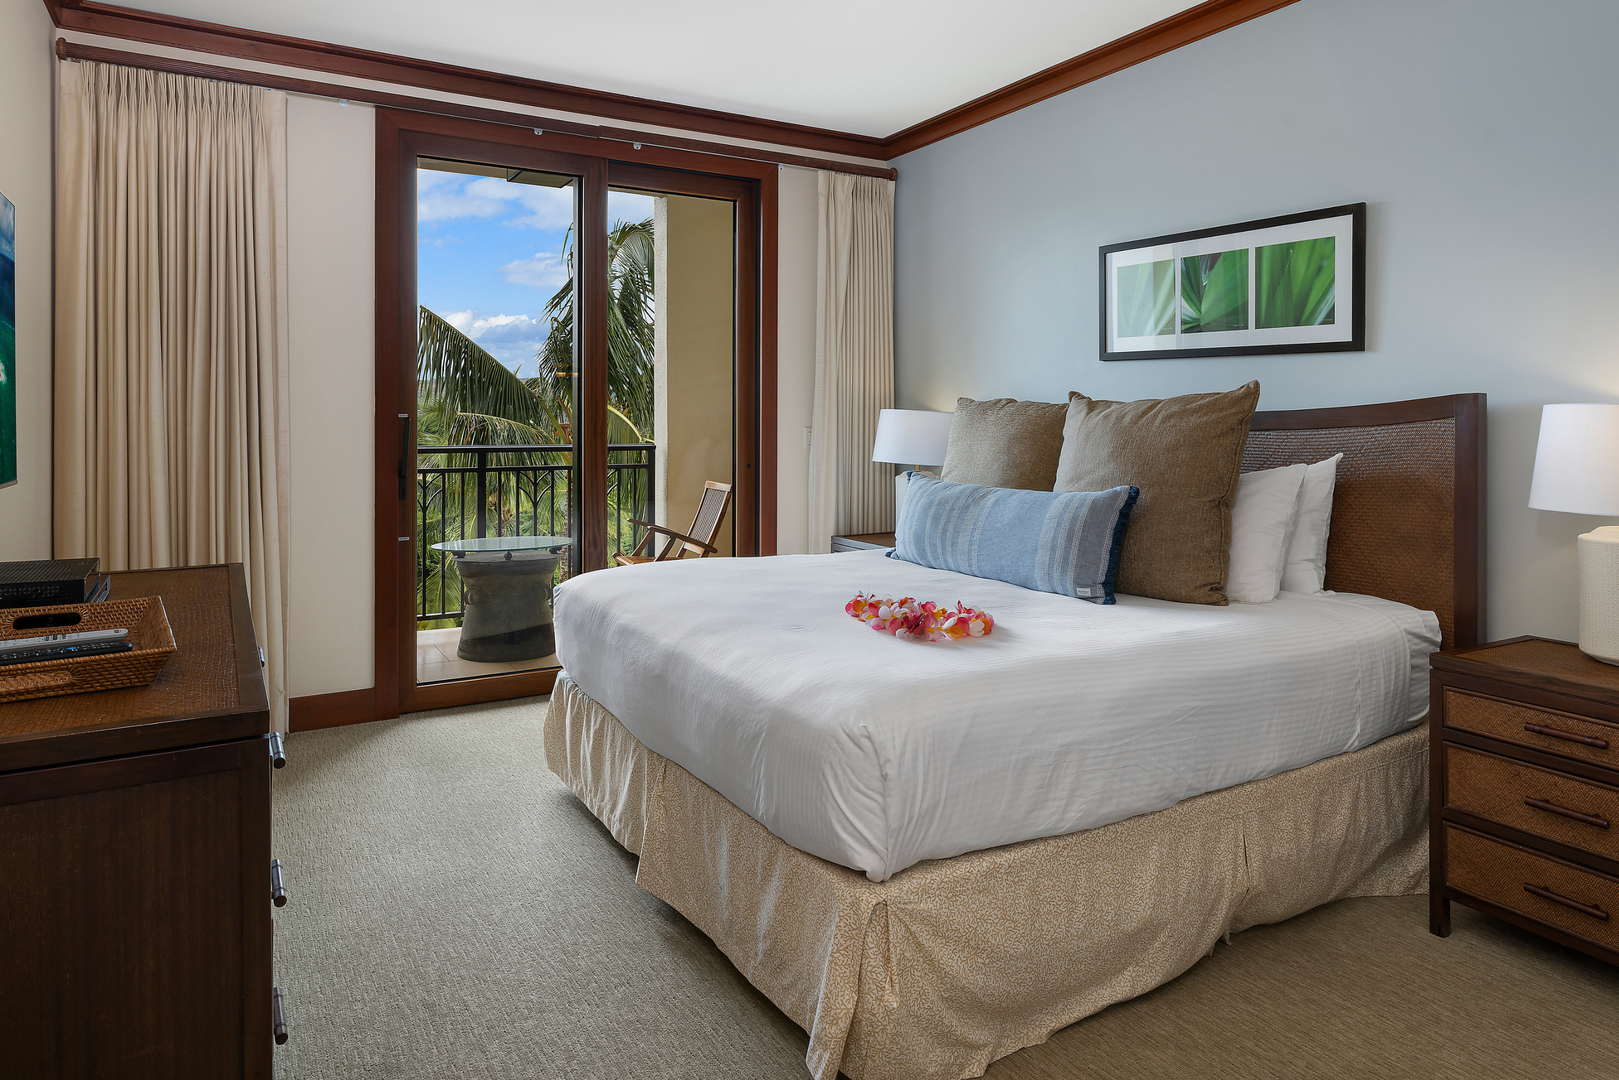 Kapolei Vacation Rentals, Ko Olina Beach Villas O505 - The primary bedroom with a private lanai with golf course views, features king size bed, luxury linens, and storage.